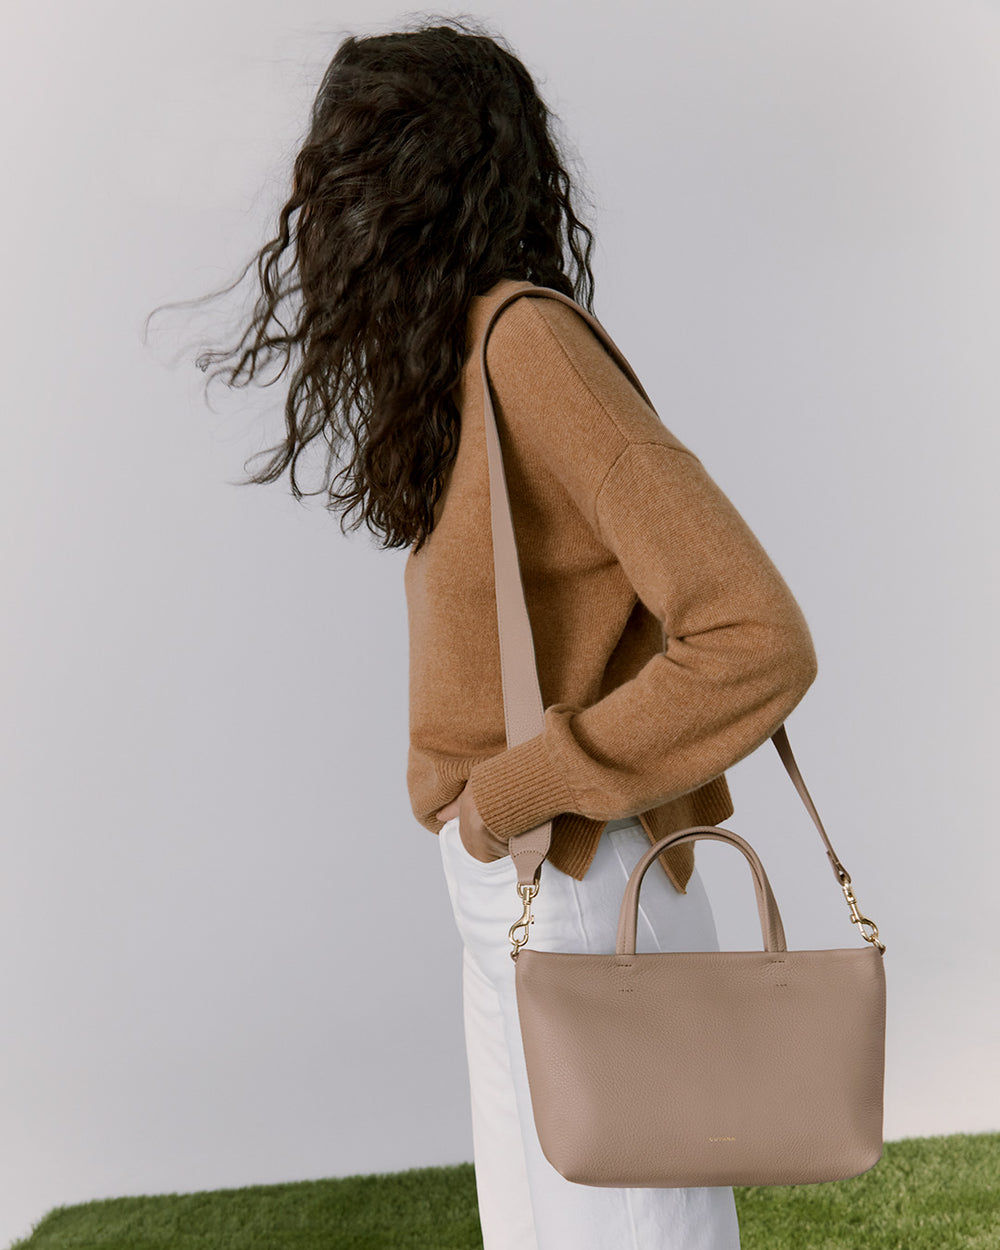 Woman standing with back turned, holding a handbag on her shoulder.